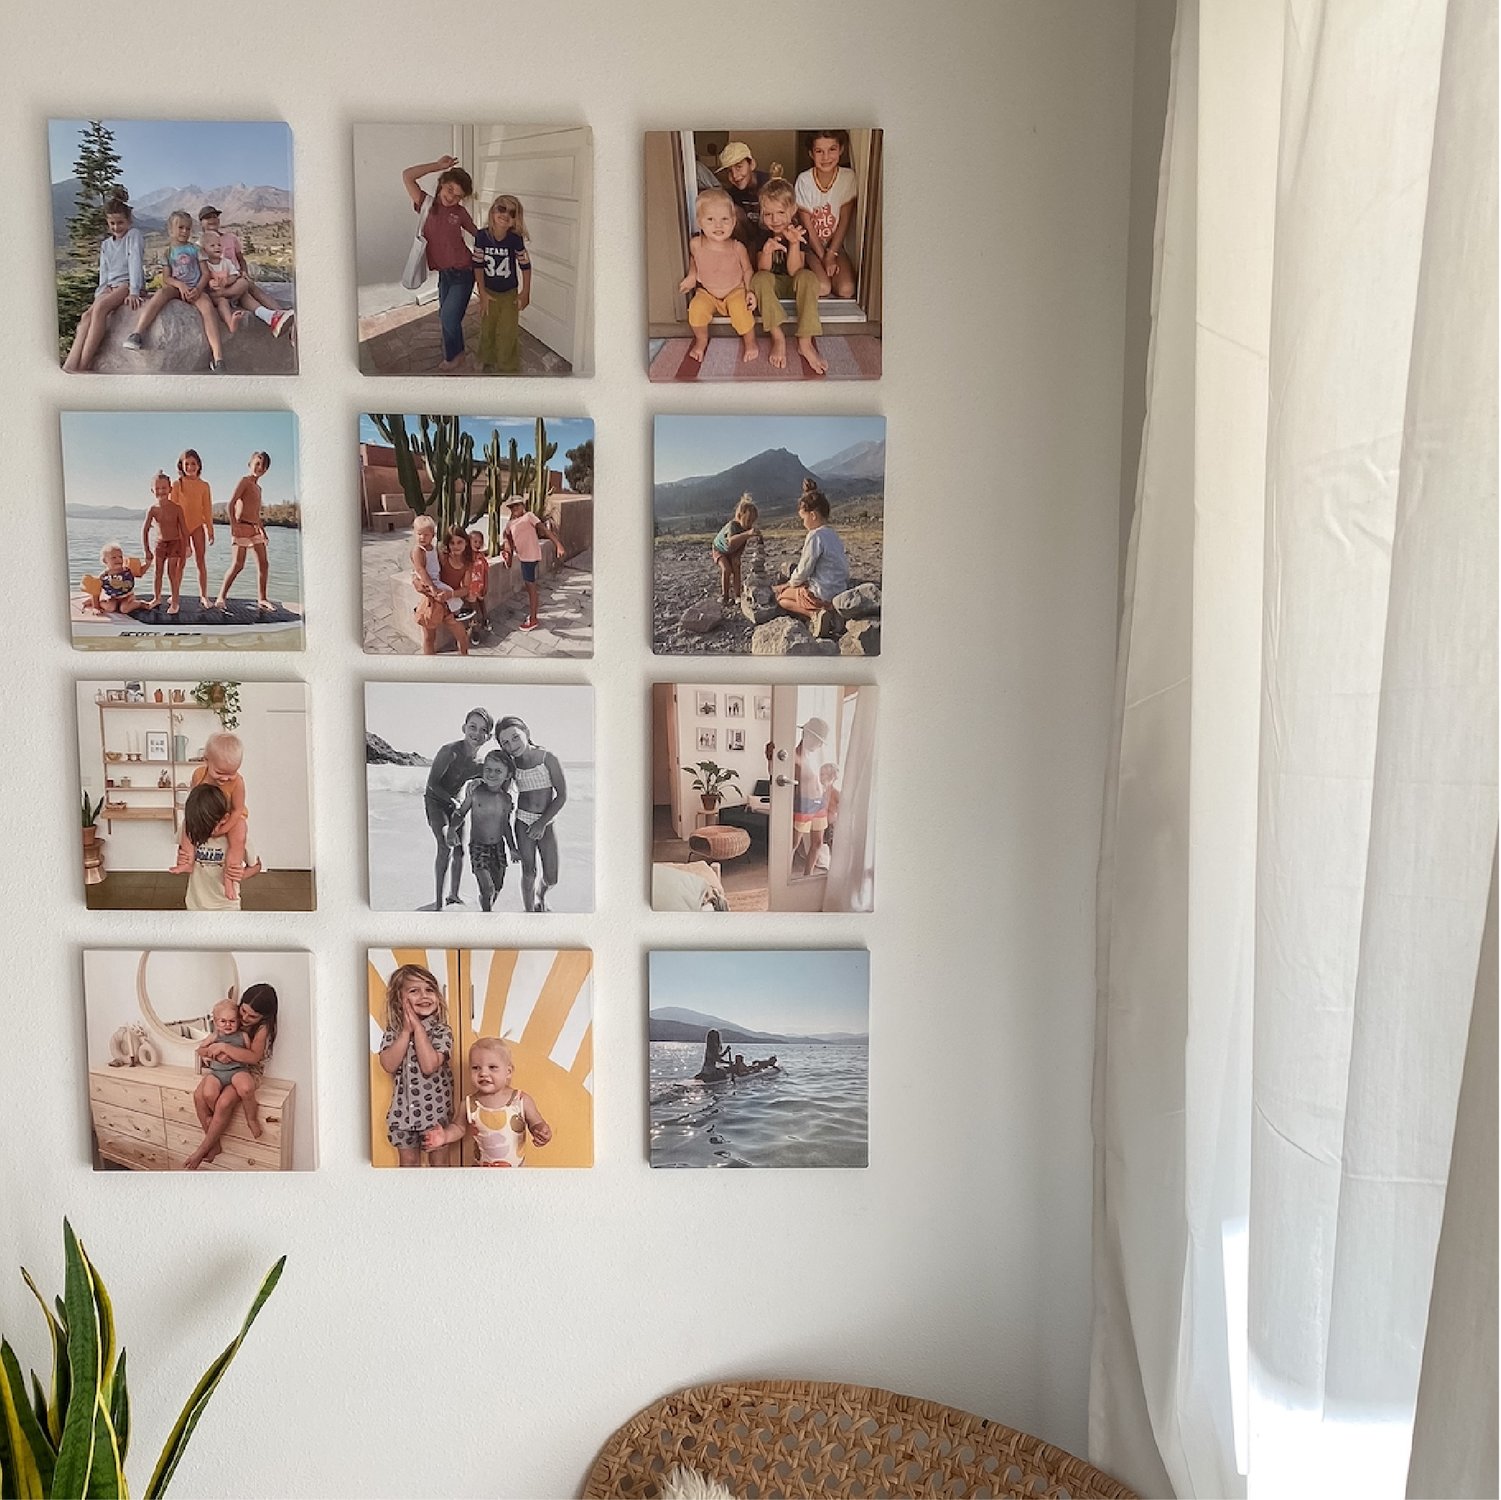 Create Wall Tiles of Your Guests